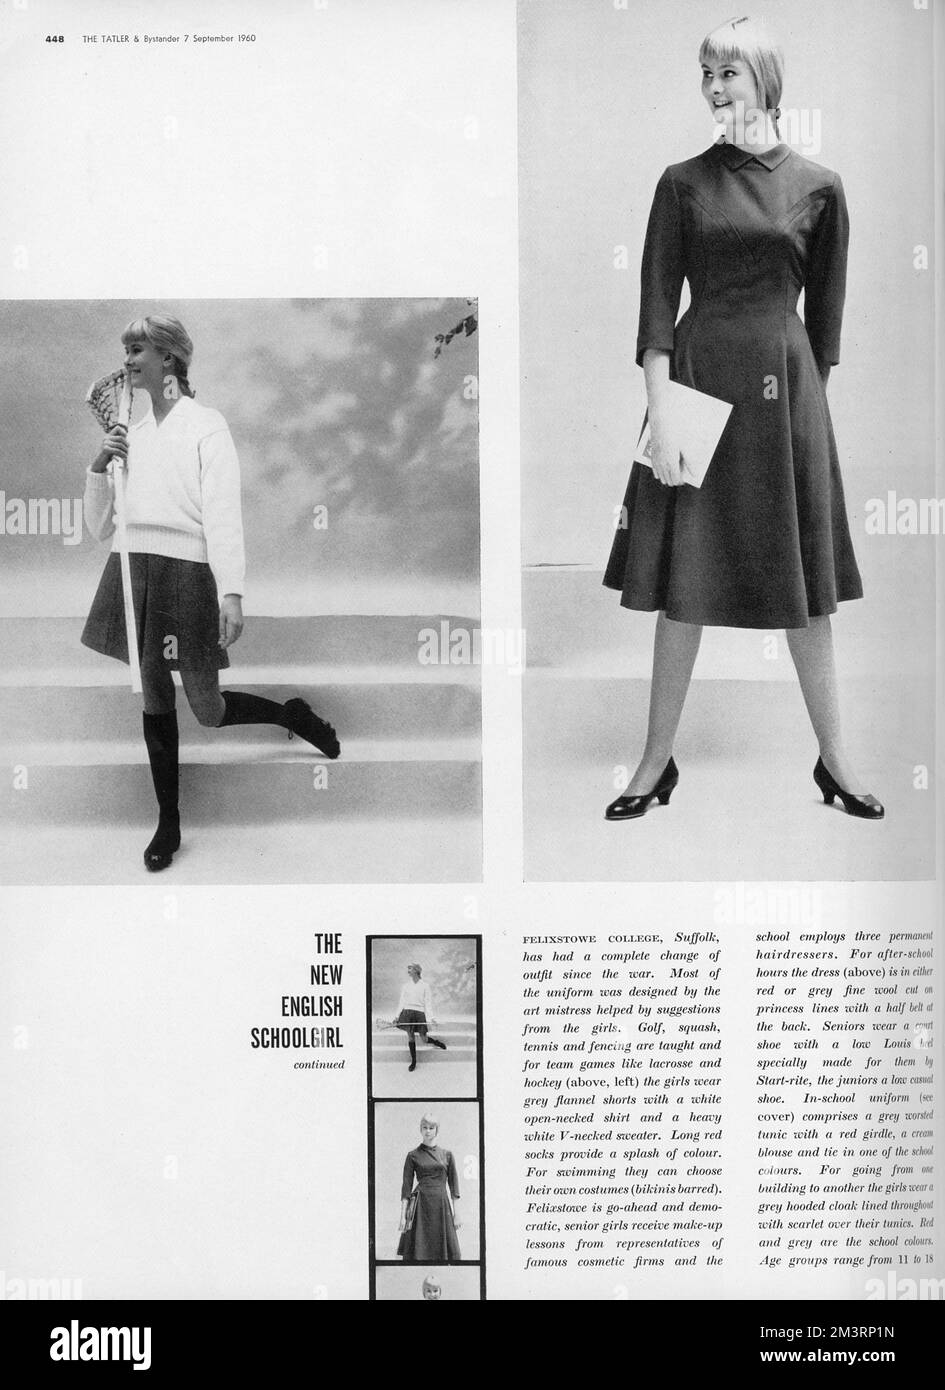 A page from The Tatler and Bystander, showing school uniforms for girls in 1960, featuring the costume of Felixstowe College, Suffolk. Sports attire is pictured on the left, with grey flannel shorts with a white open necked shirt and a heavy white V-necked sweater. For after school hours, a dress of red or grey fine wool cut on princess lines with a half belt at the back is worn(right). Felixstowe College was a girls' independent school, established in 1929 and closed in 1994.     Date: 1960 Stock Photo